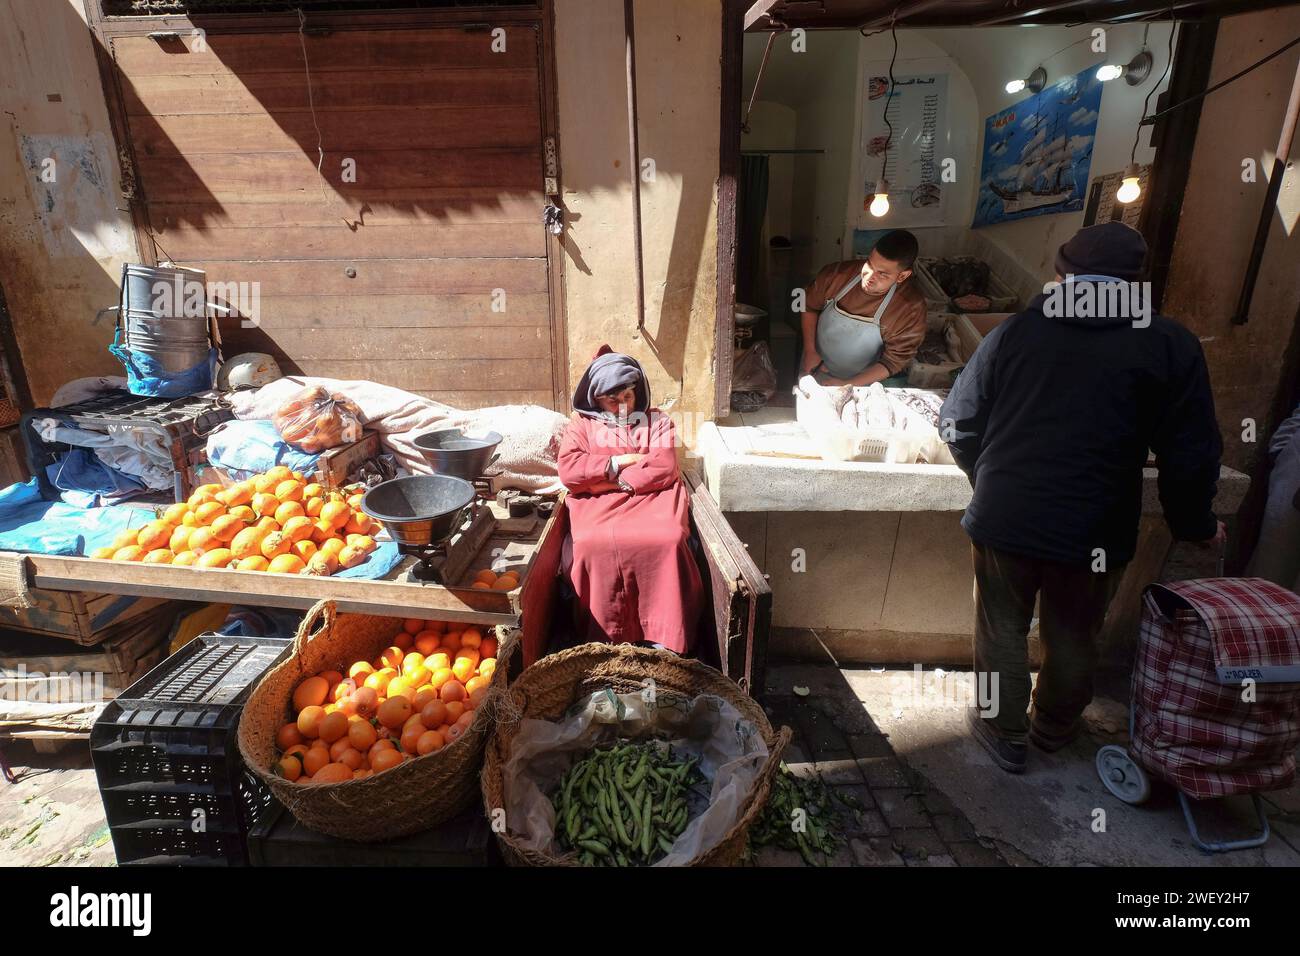 Old man selling fruits and vegetables in the roadside market Souk in the city of Fes in Morocco. Local shops on the road. Stock Photo